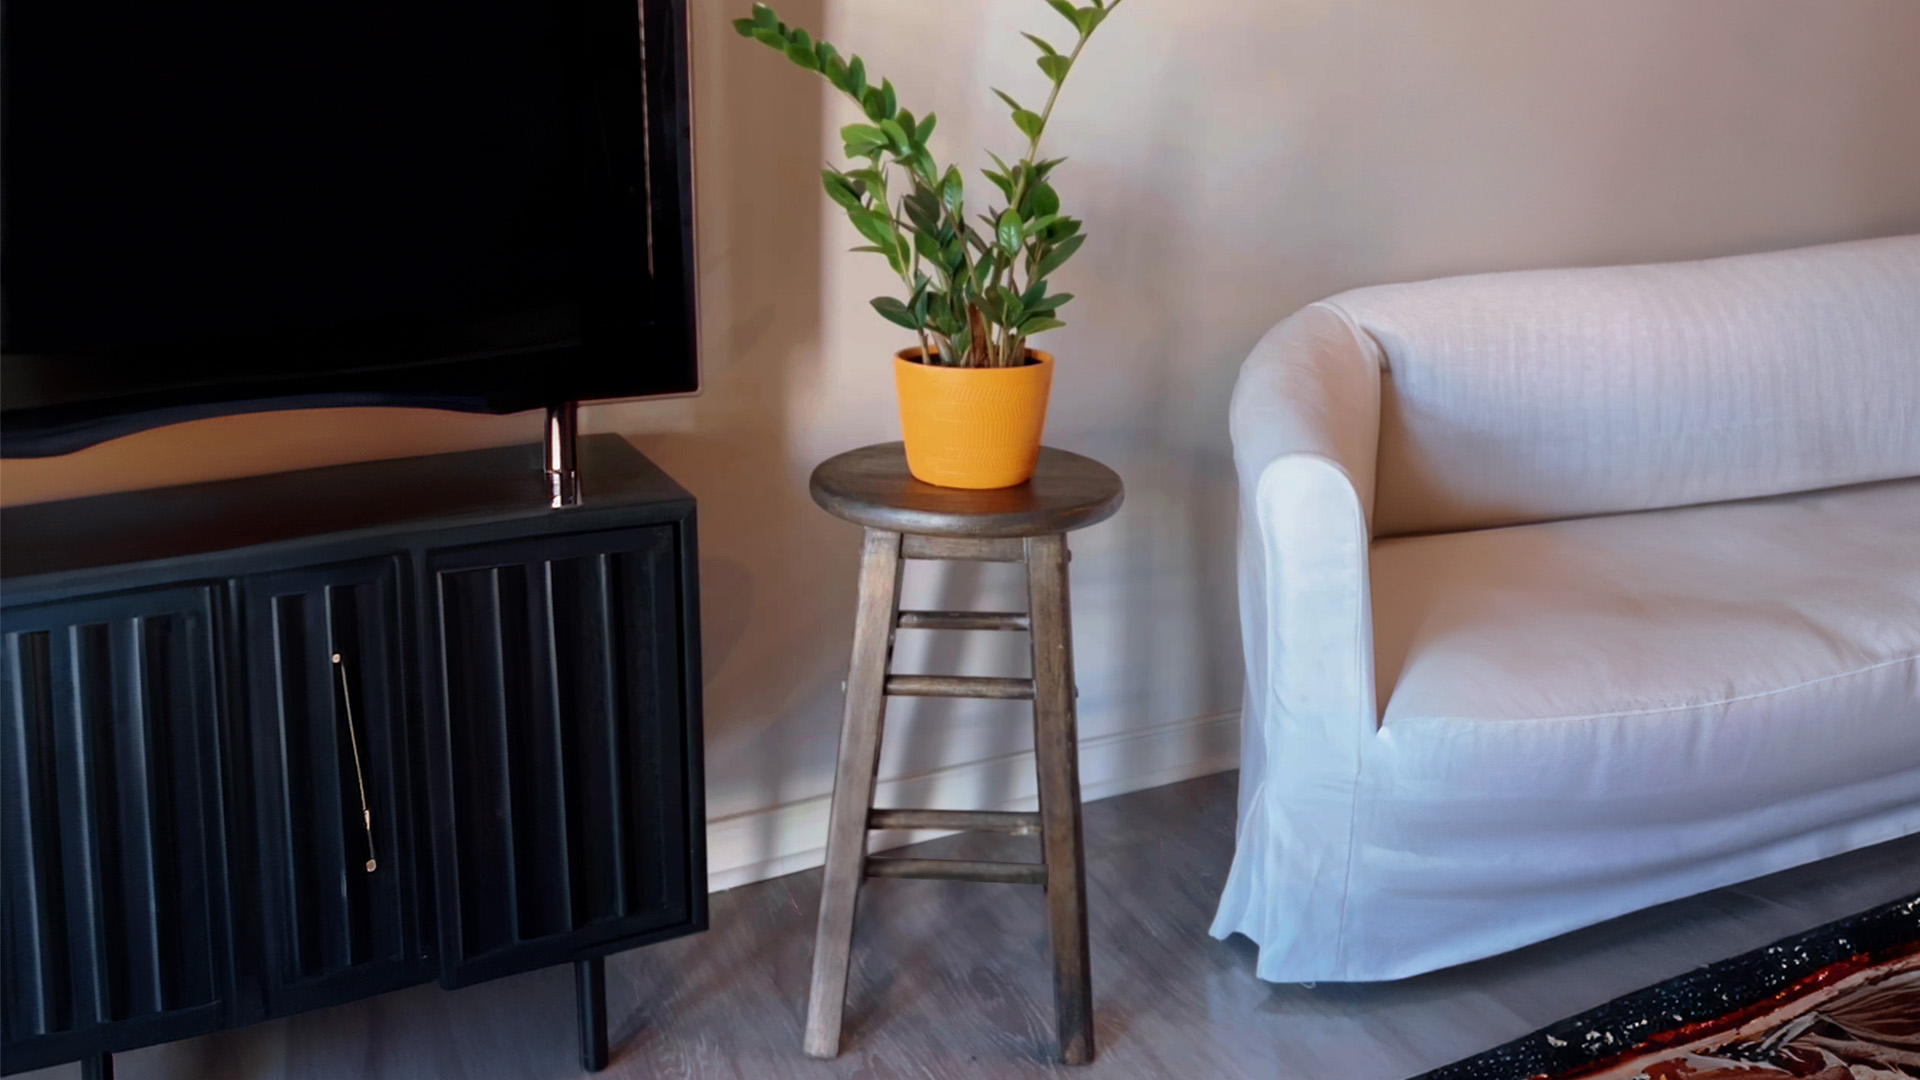 DIY Plant Stand Final Image